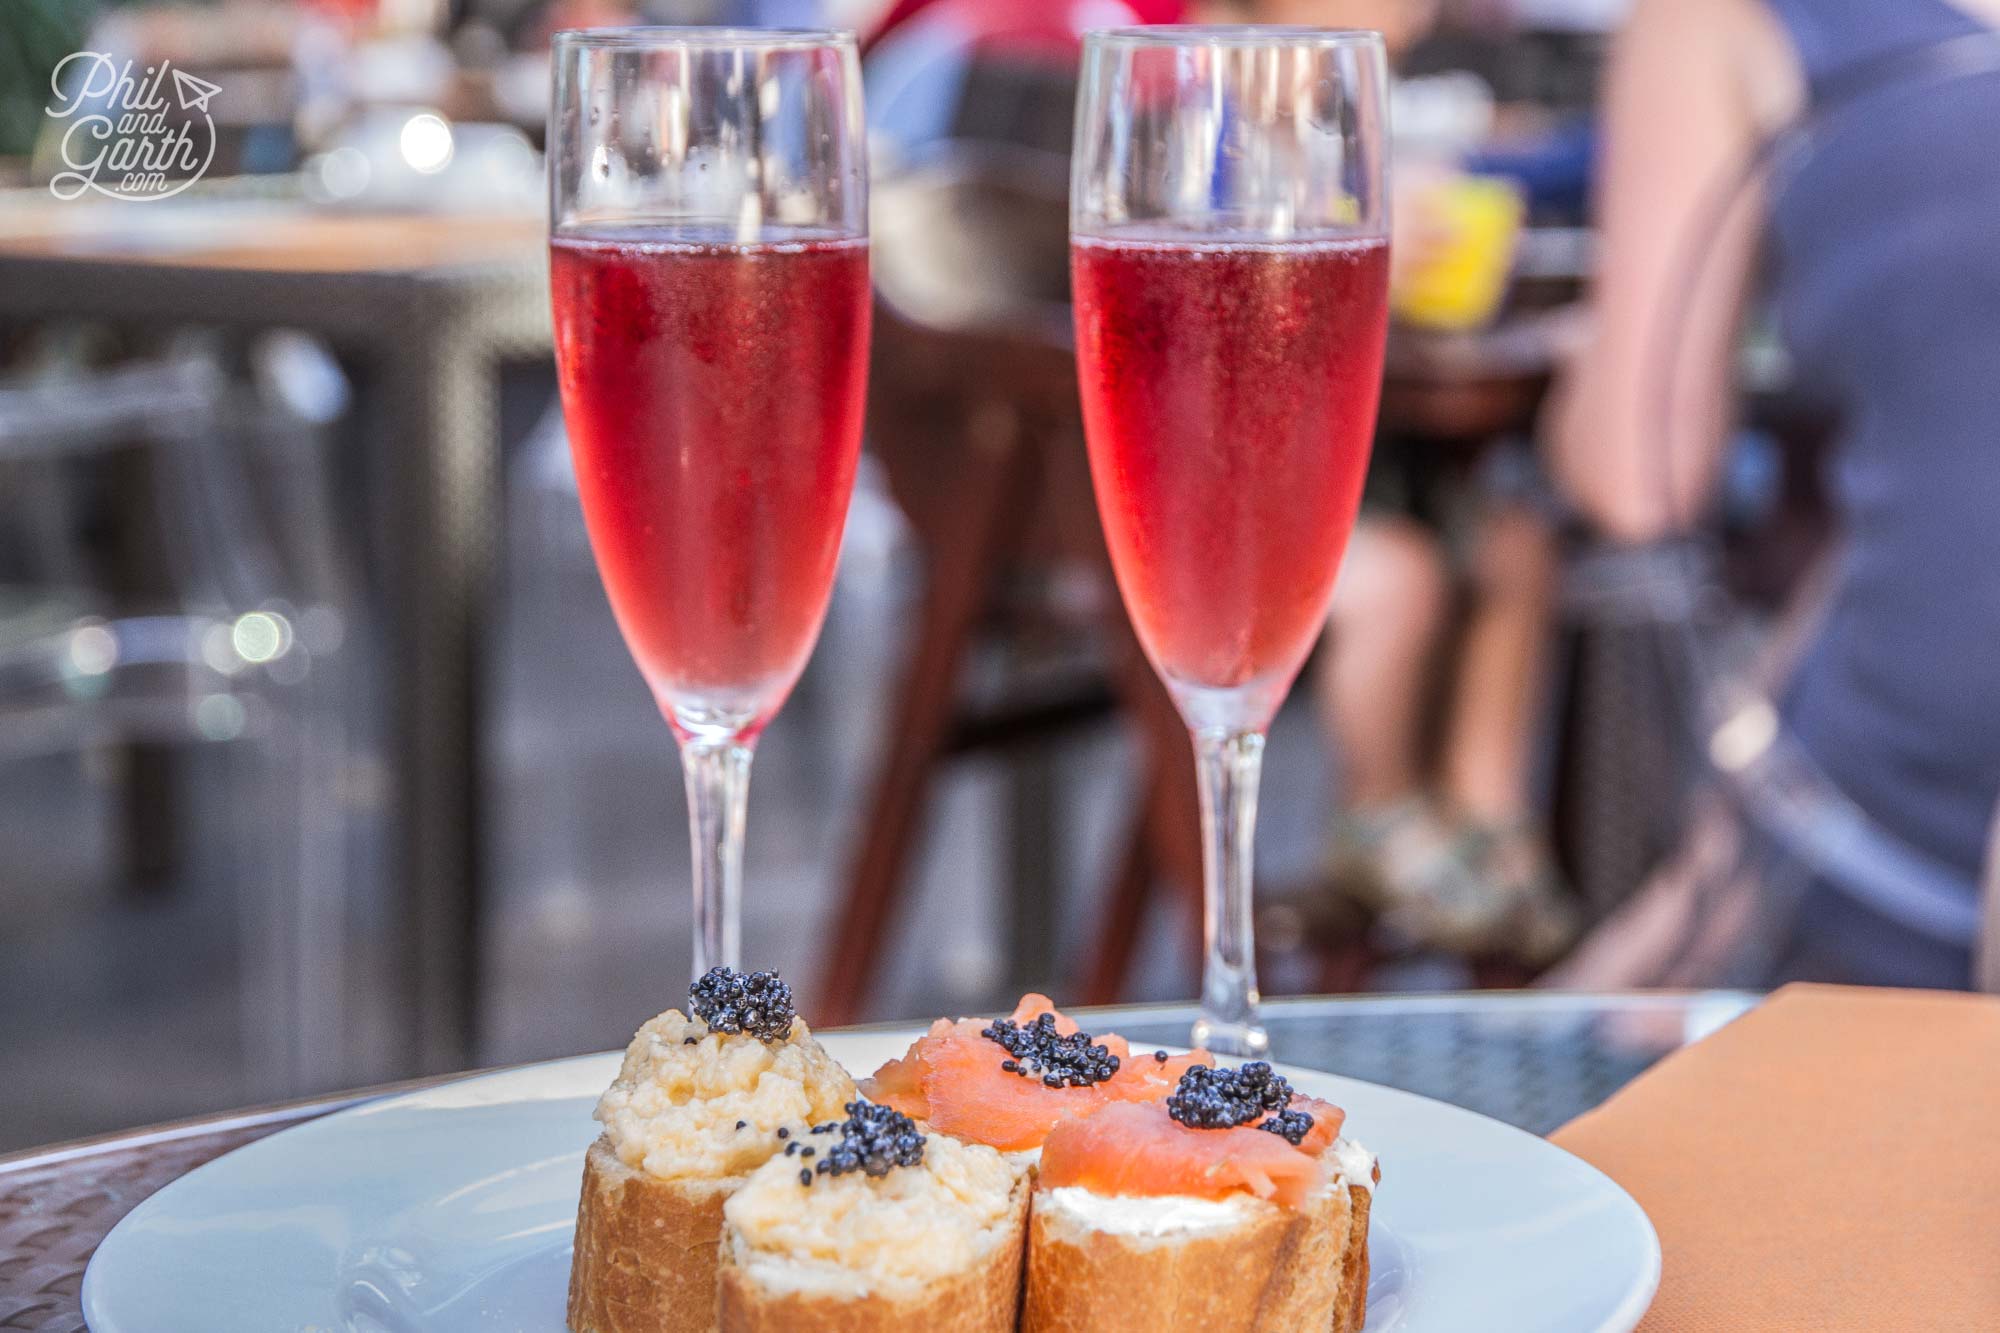 Pink champagne and caviar for breakfast - oh go on then!